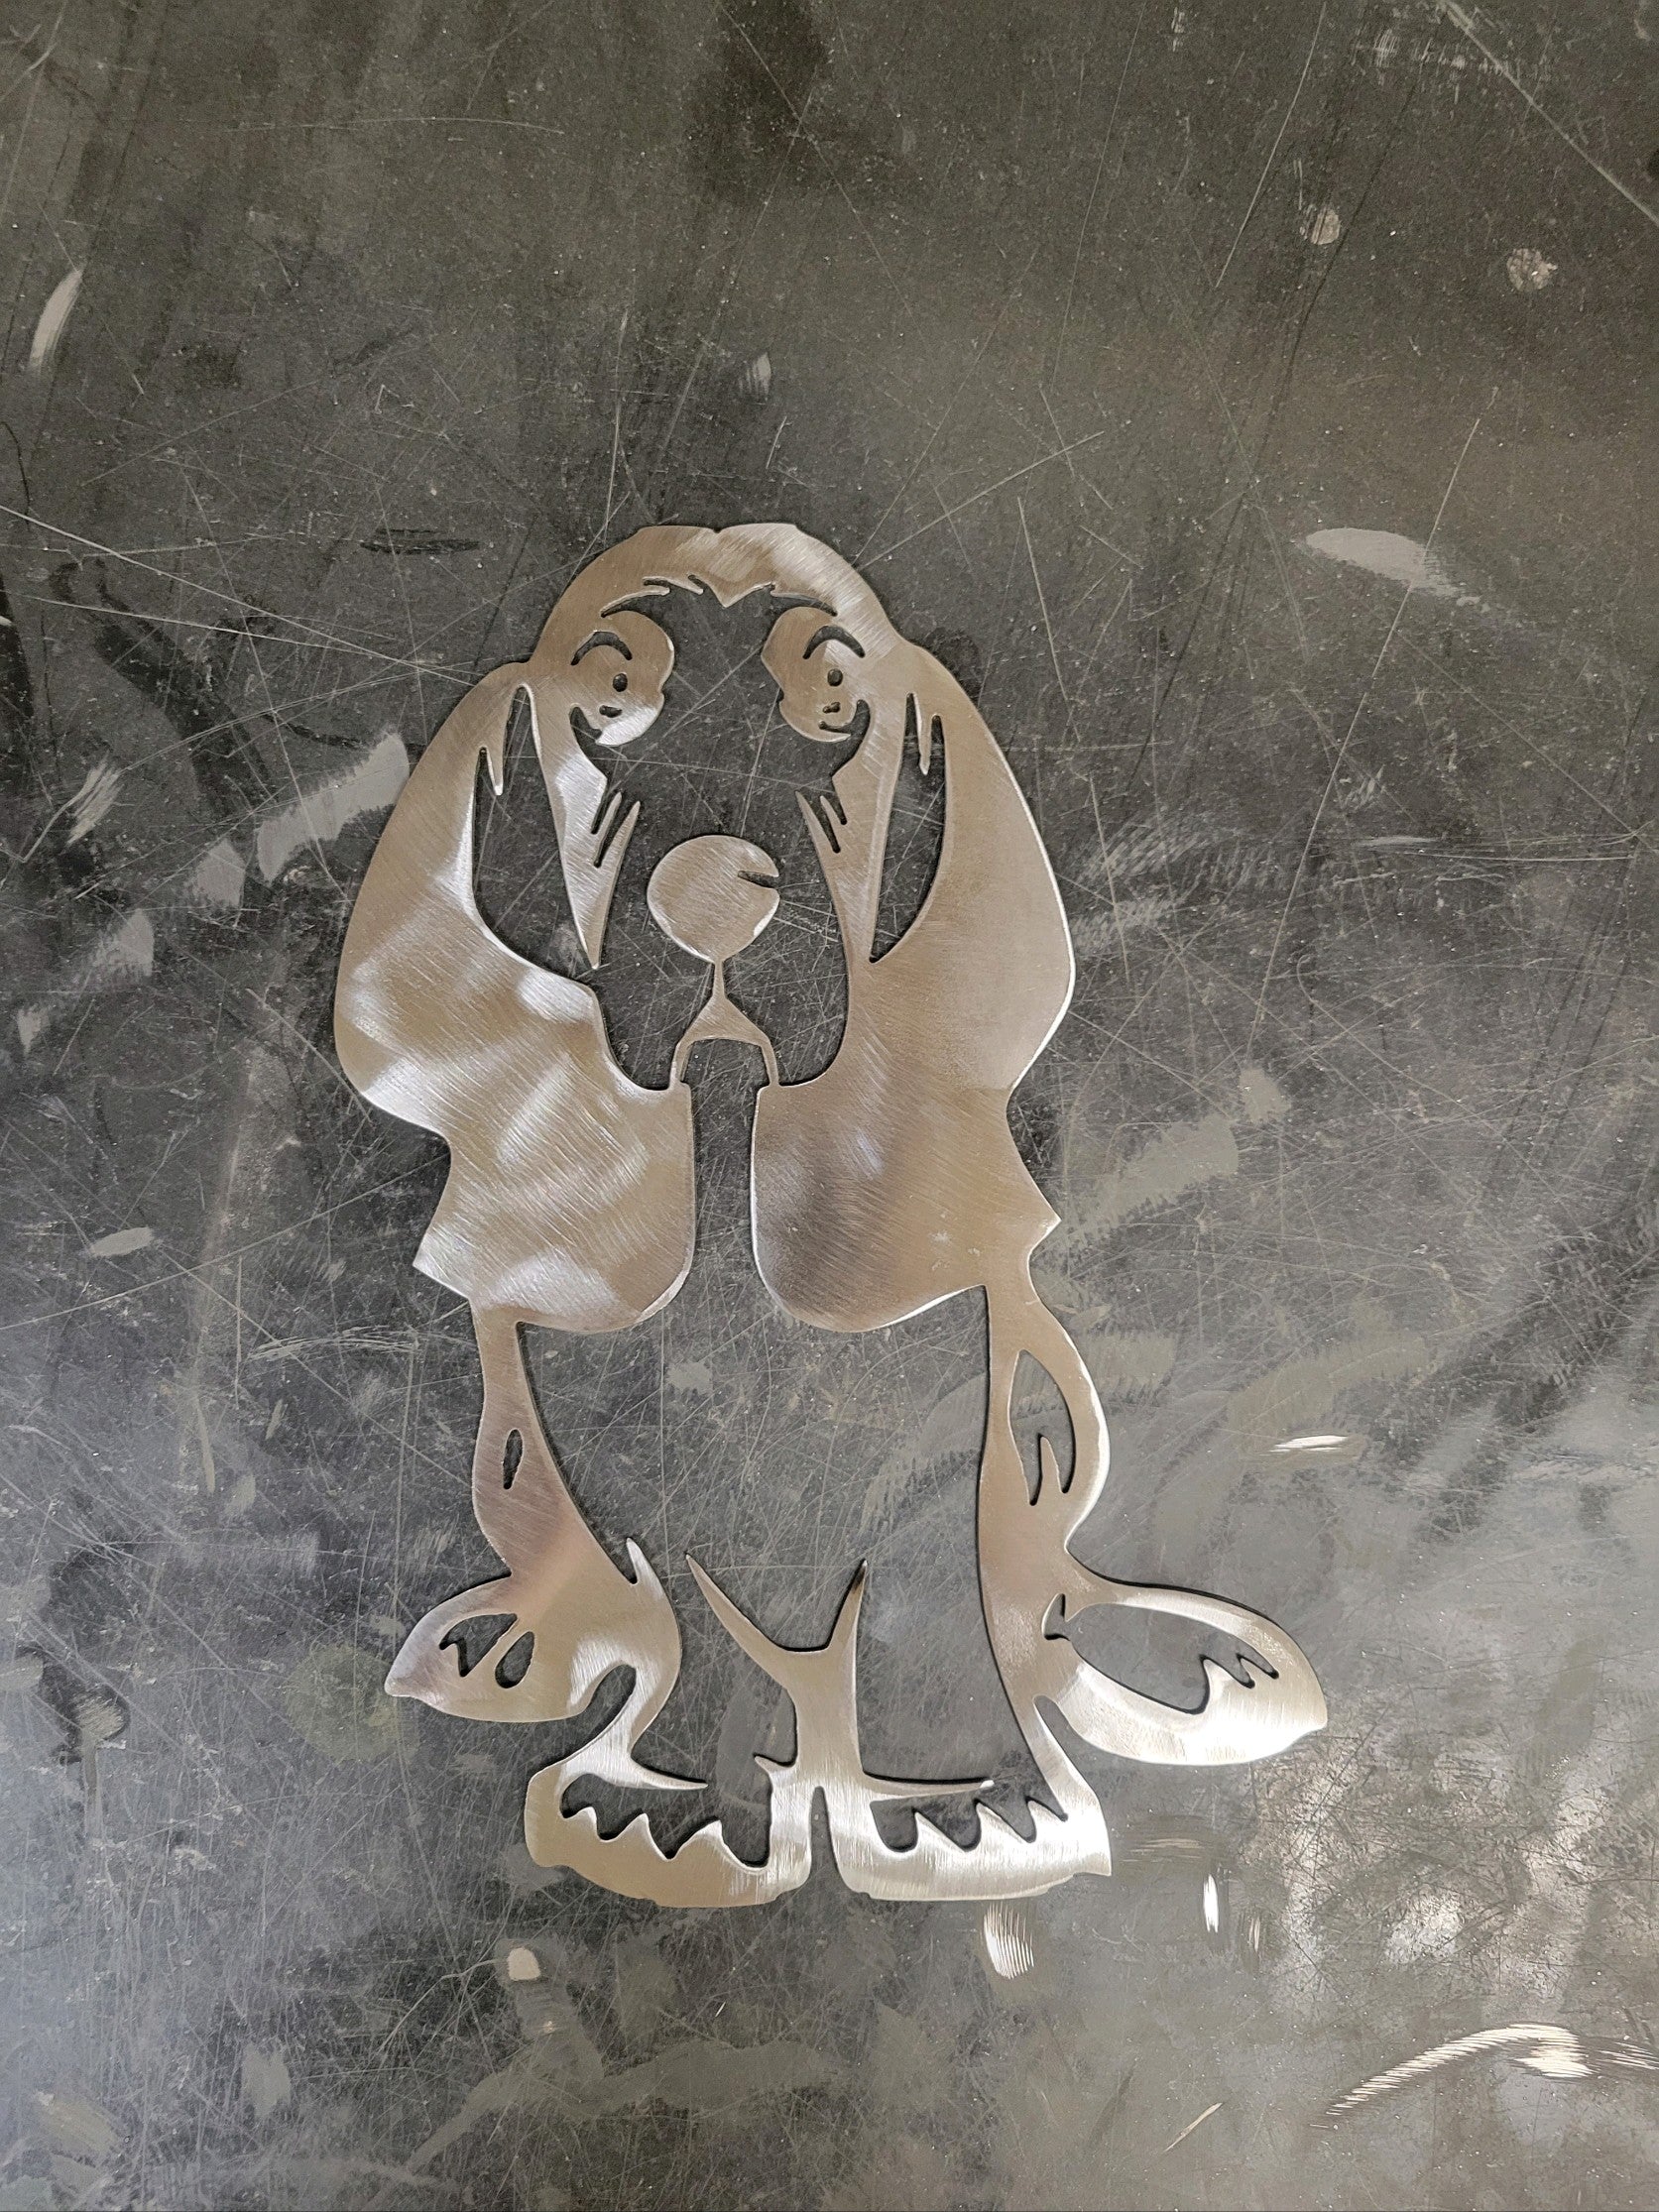 Basset hound dog metal wall art home décor steel sign memorial pet loss personalized custom